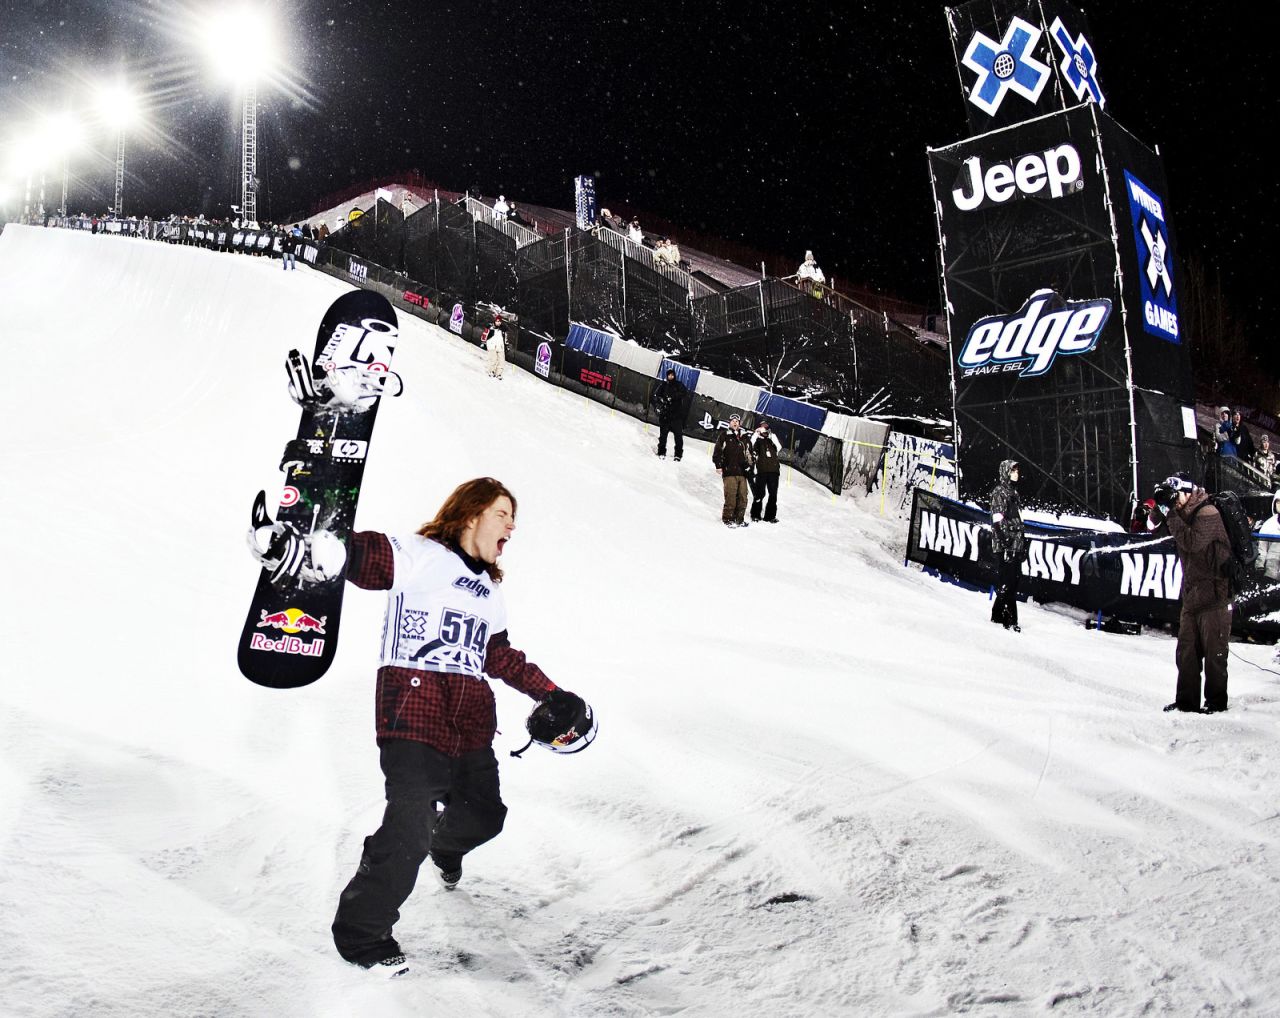 White celebrates after his final superpipe run at the Winter X Games in 2009. He won the event for a second straight year.